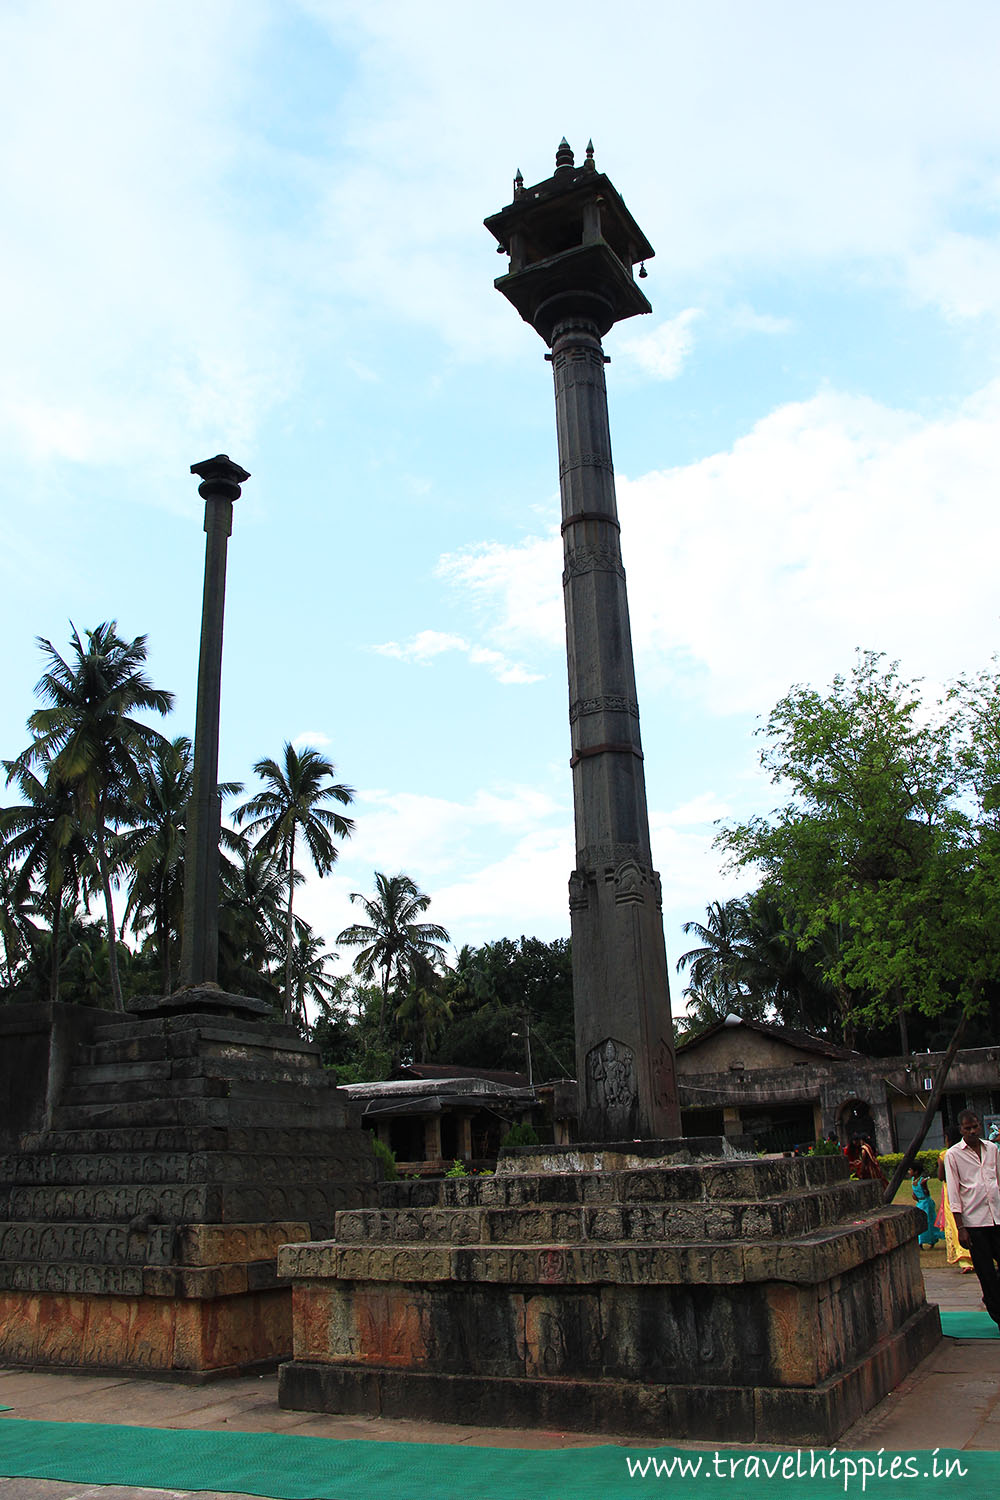 The pillars in the temple complex